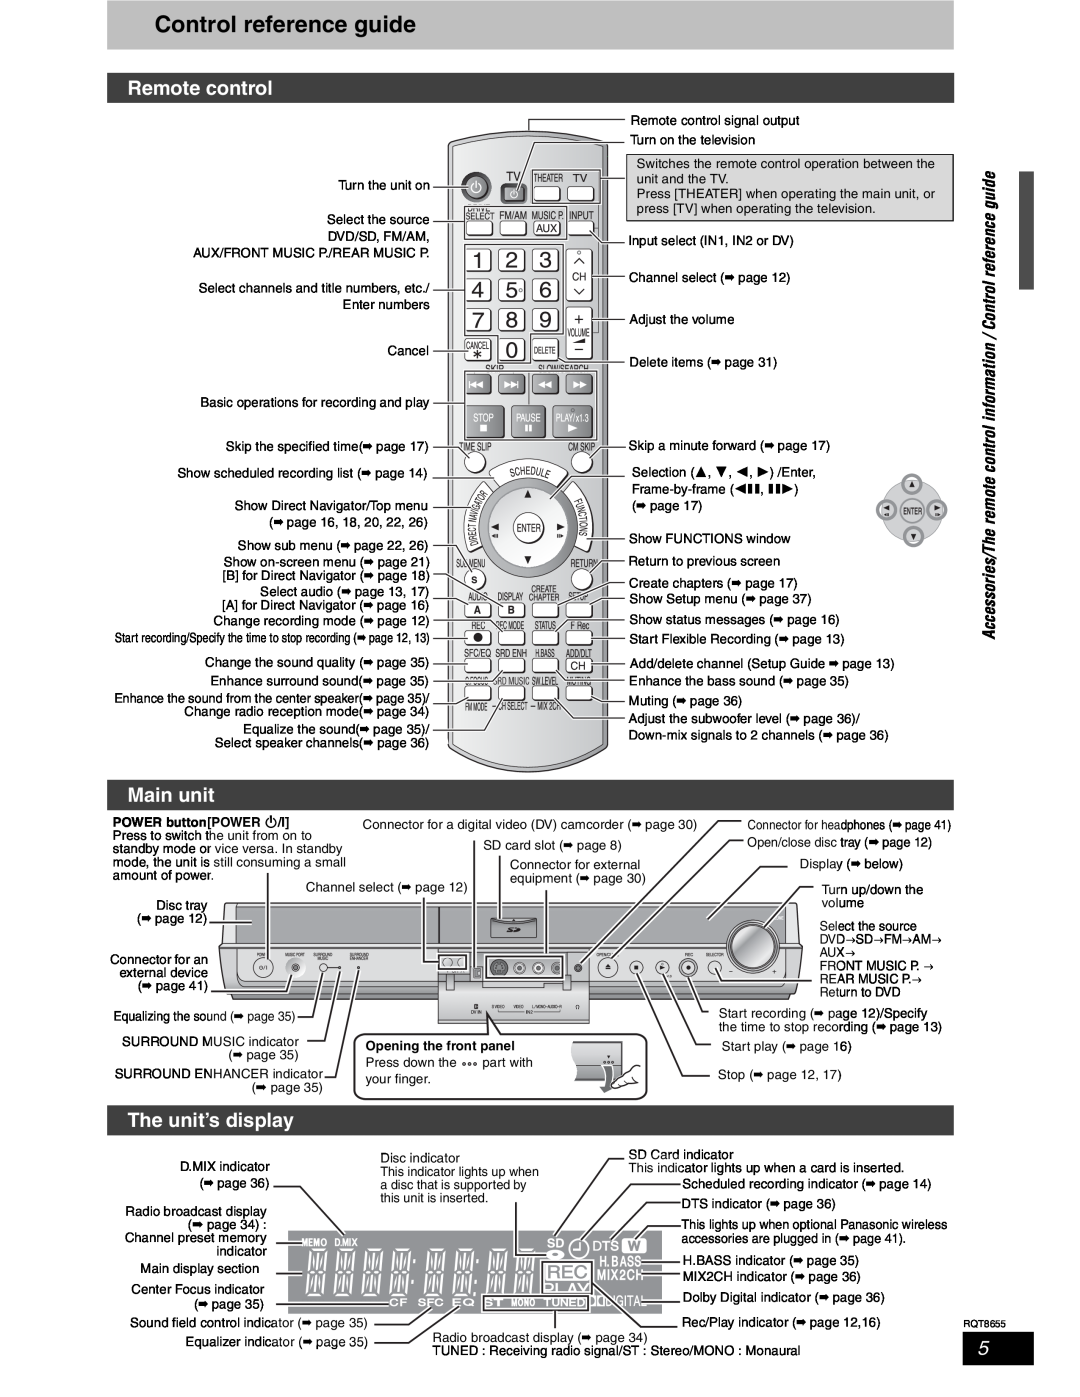 Panasonic SC-RT50 warranty Control reference guide, Remote control, Main unit, The unit’s display 